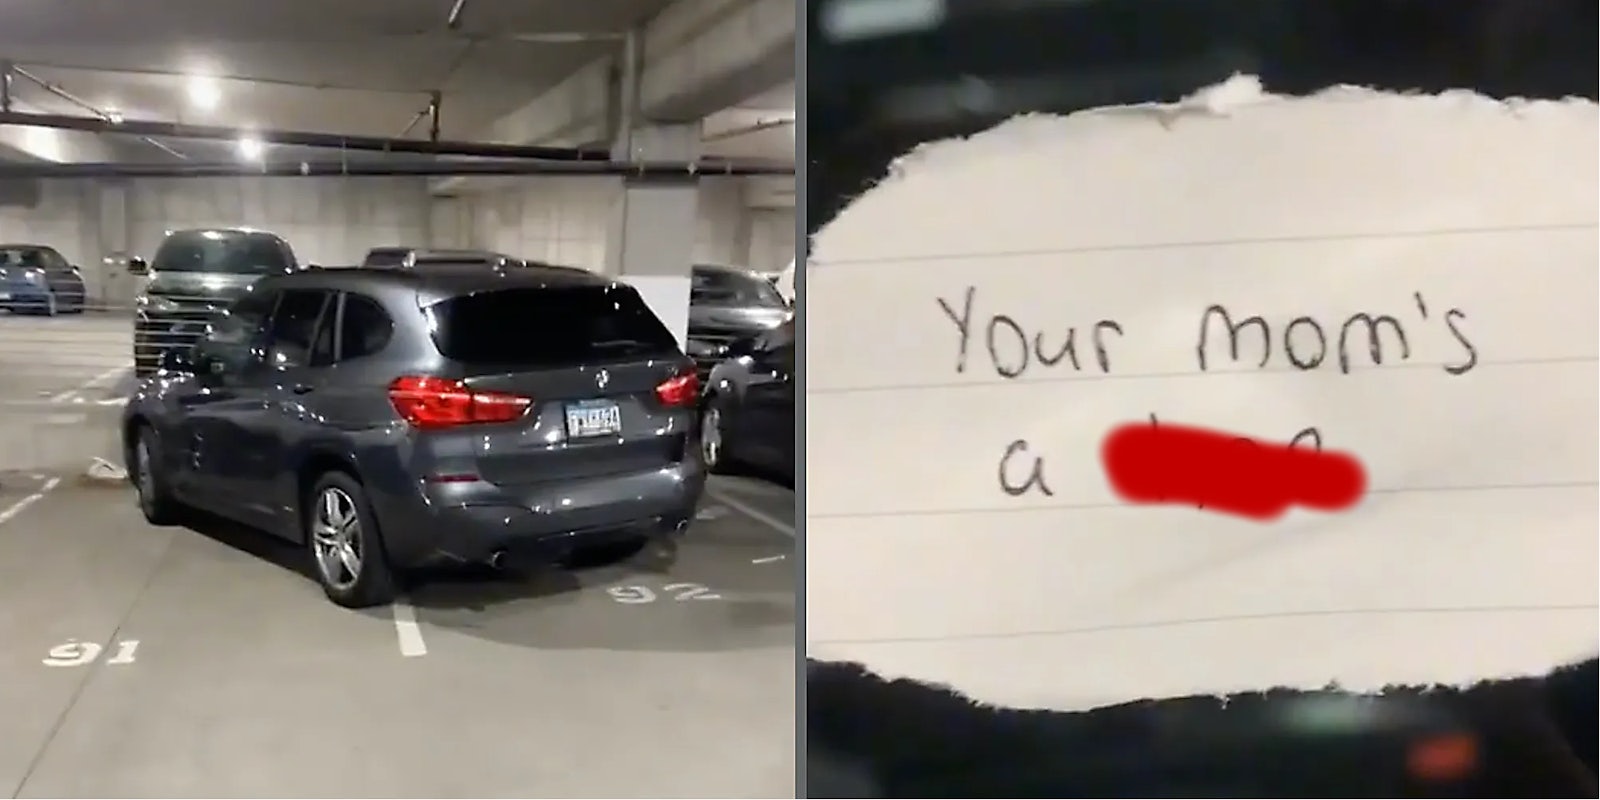 A car in a parking garage (L) and a hand written note (R).